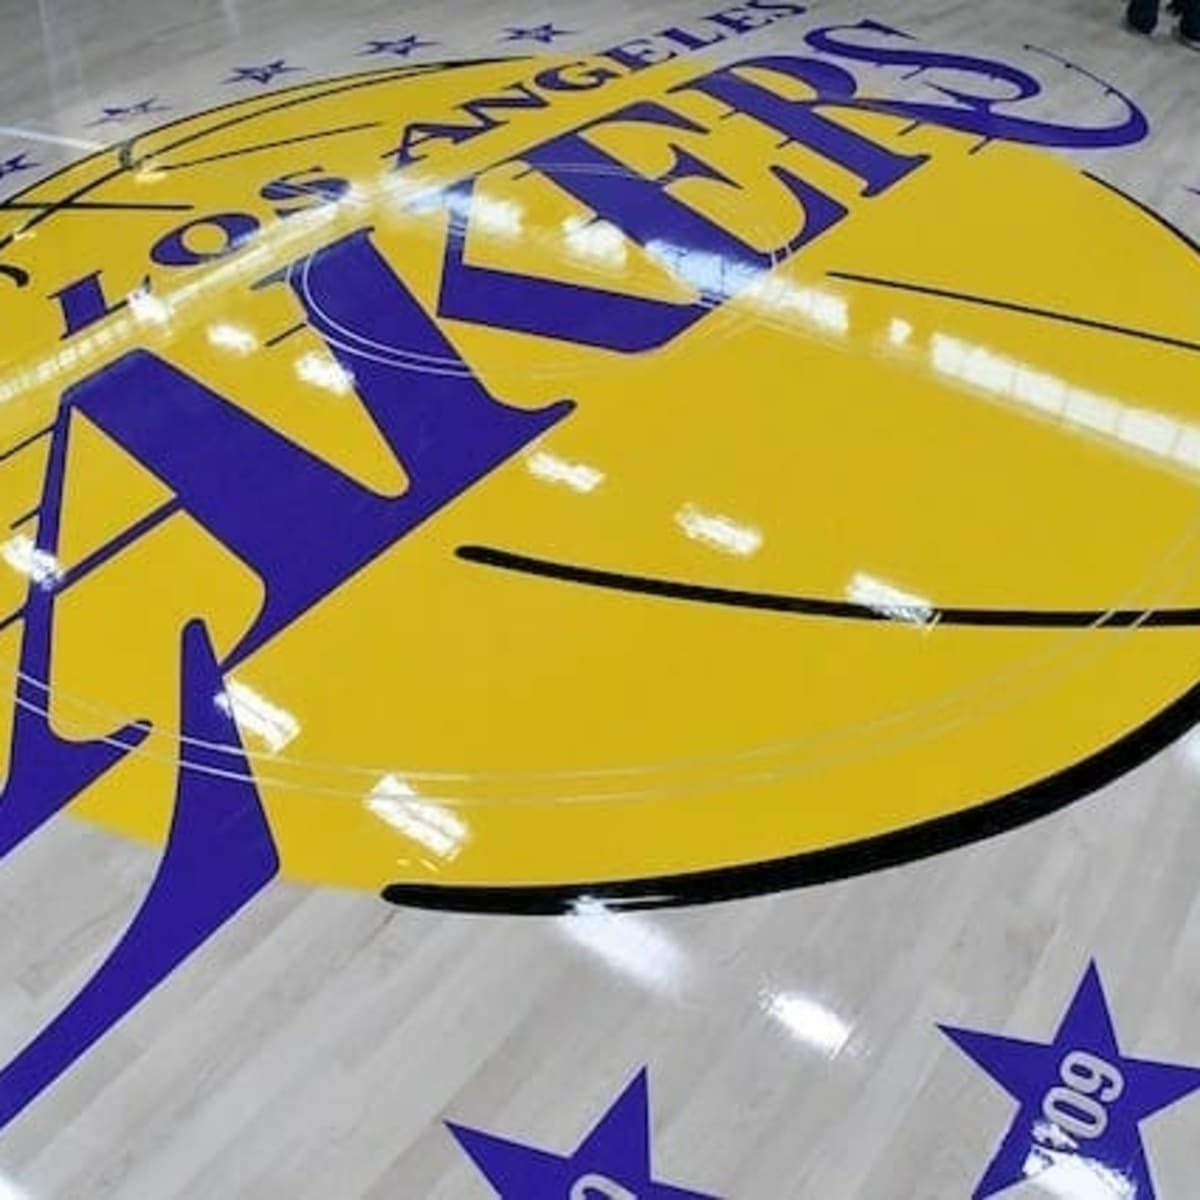 The Lakers' new uniforms have a 'Showtime' throwback vibe, with one notable  difference